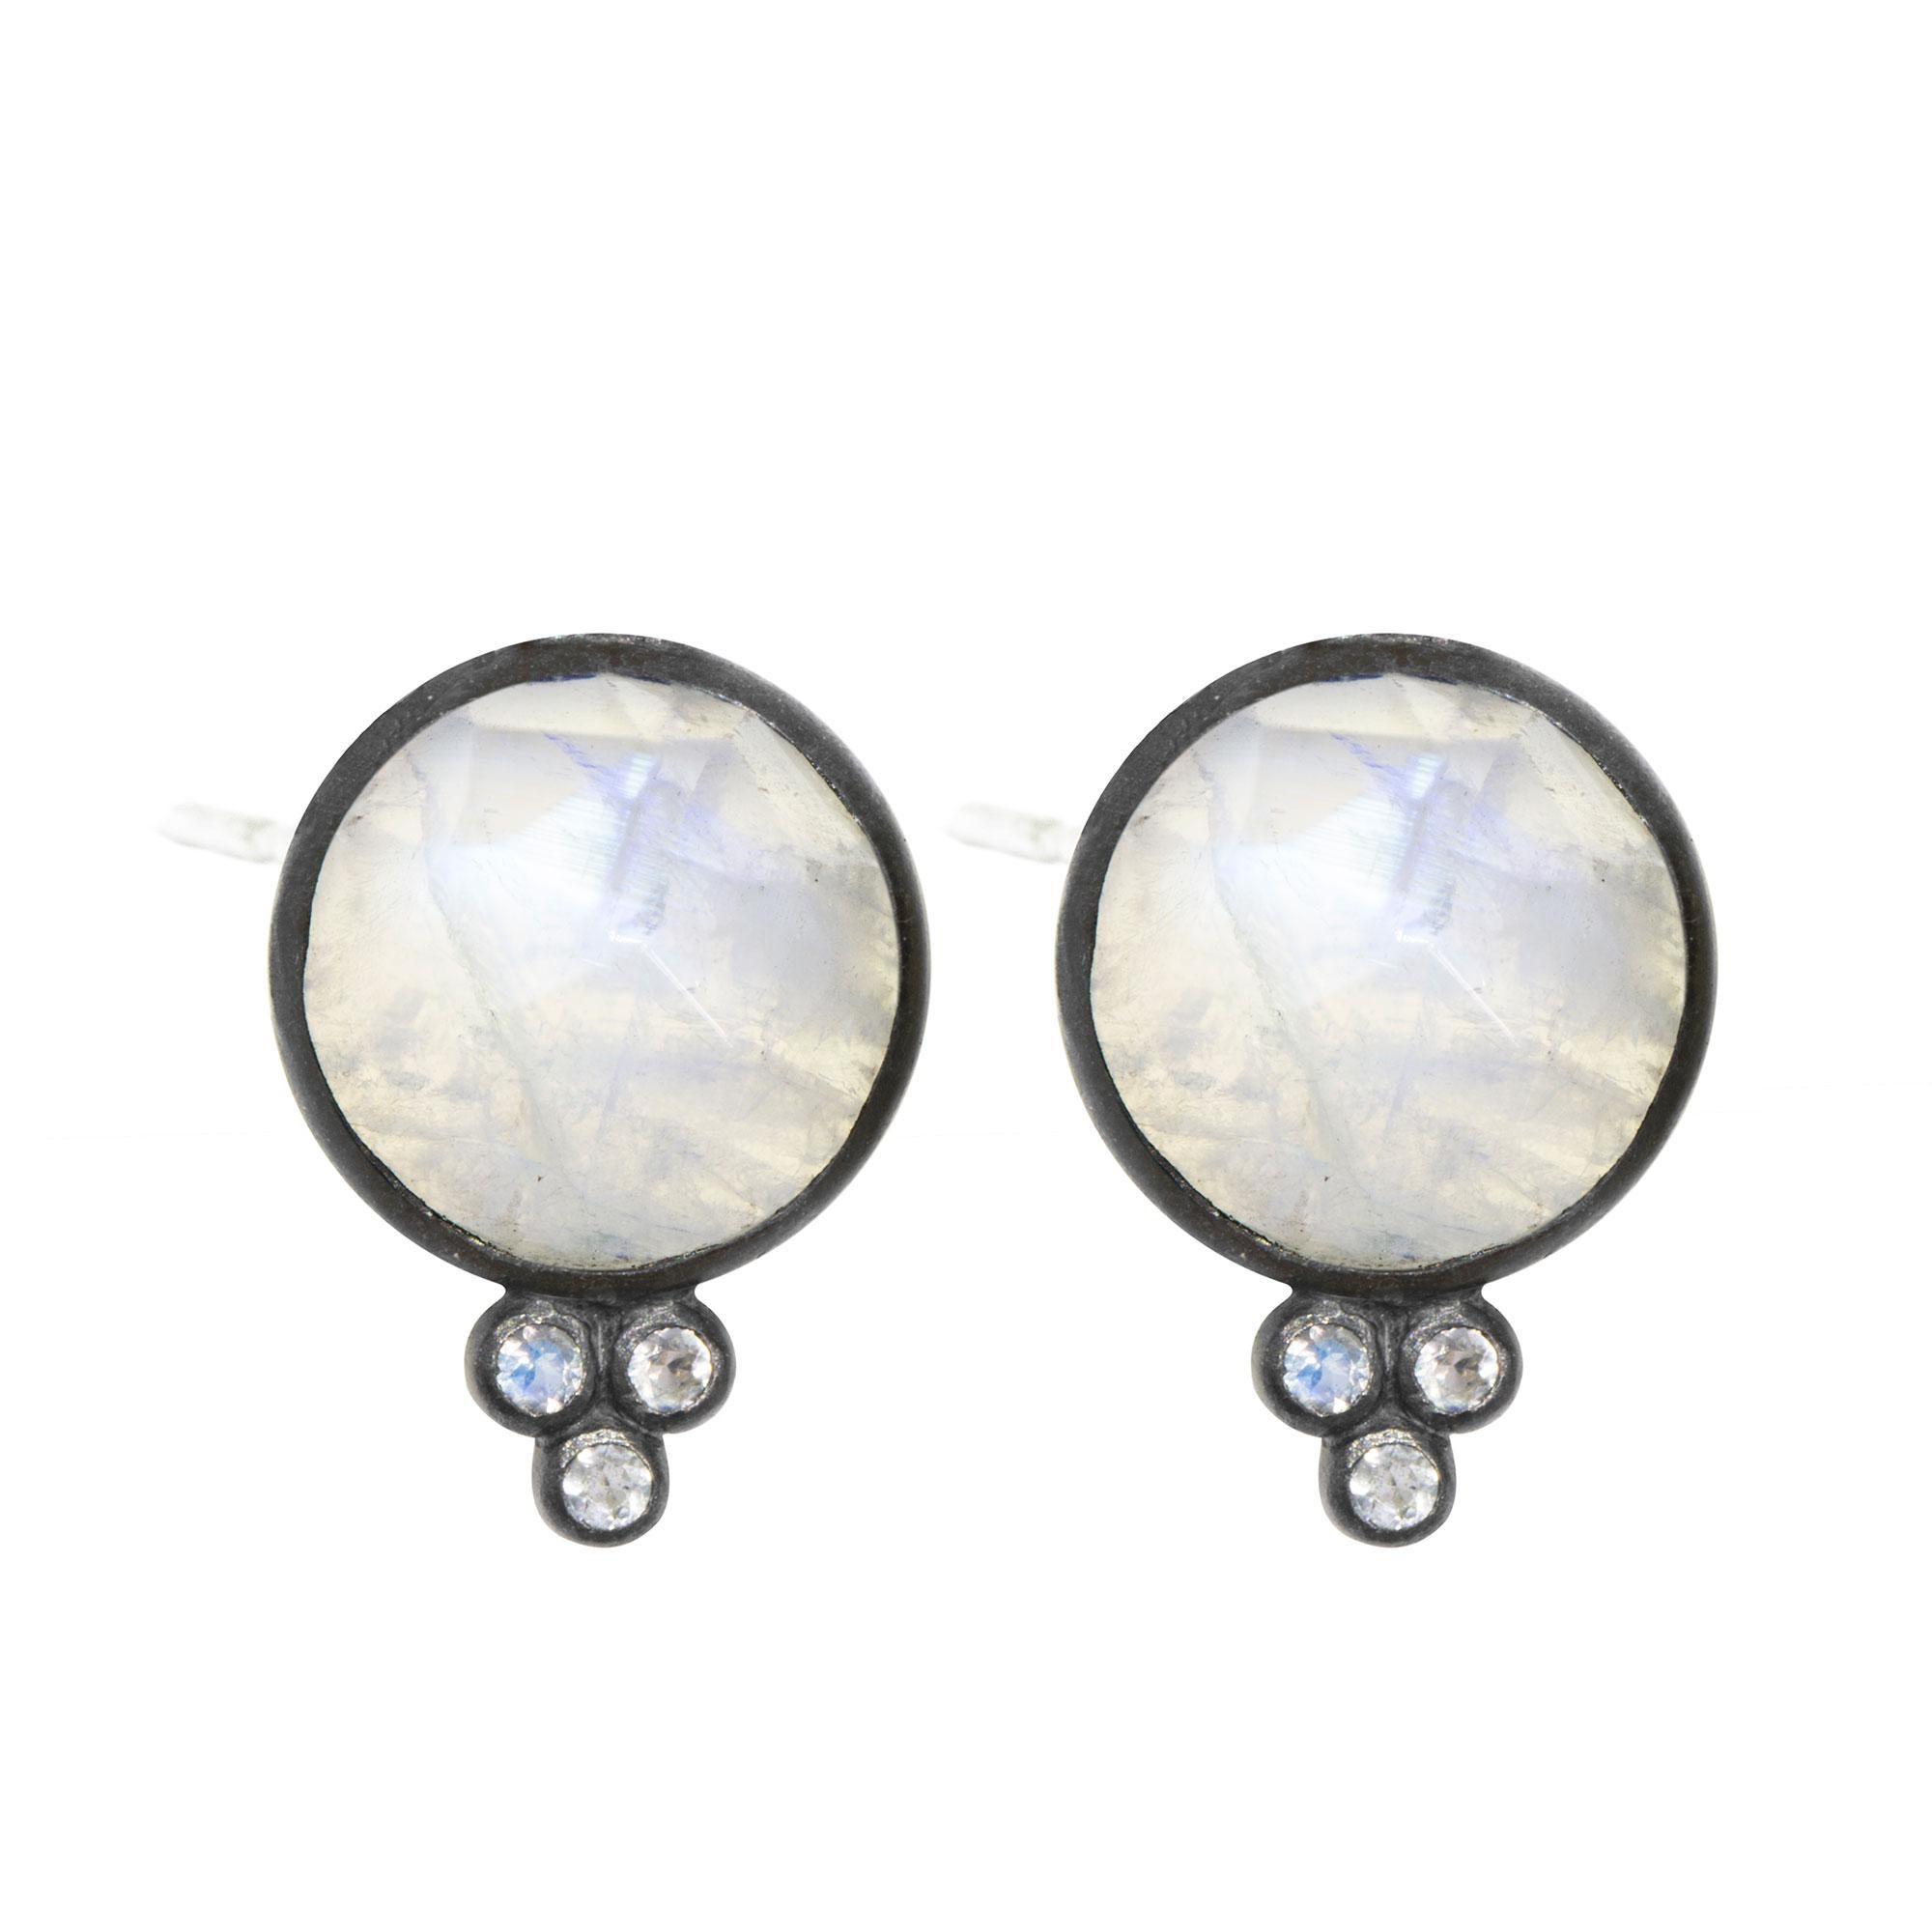 A Nina Nguyen classic: Our Chloe Oxidized Studs are designed with faceted moonstones rimmed in oxidized, and accented with gemstones for some extra sparkle.

Stone carat: 7.3
Stone size: 10mm

About the stones:
Moonstone
Formed by alternating layers